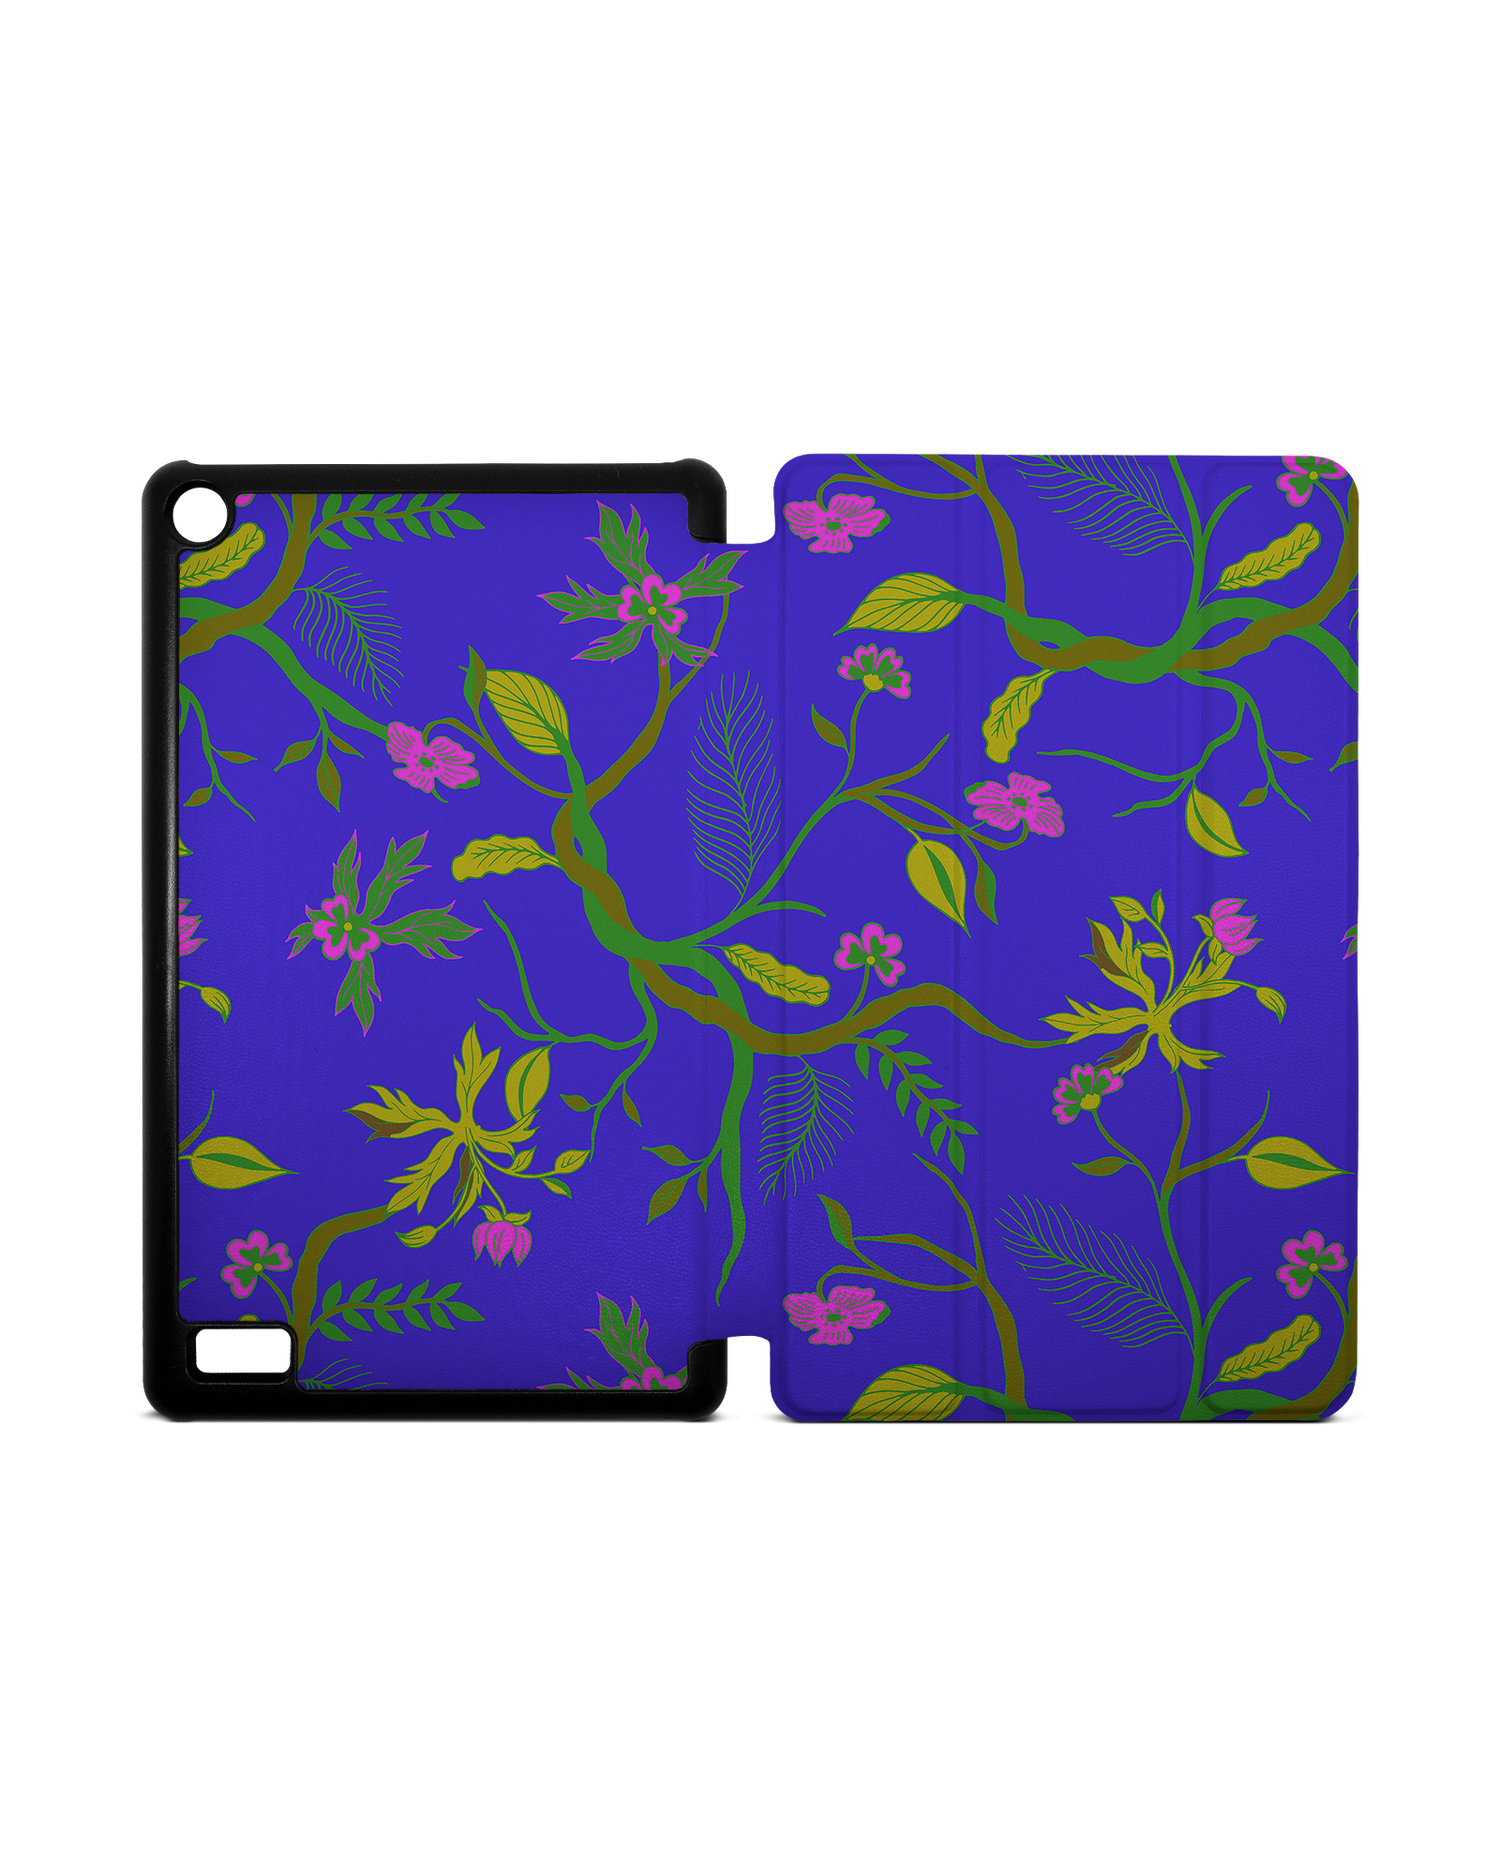 Ultra Violet Floral Tablet Smart Case for Amazon Fire 7: Opened